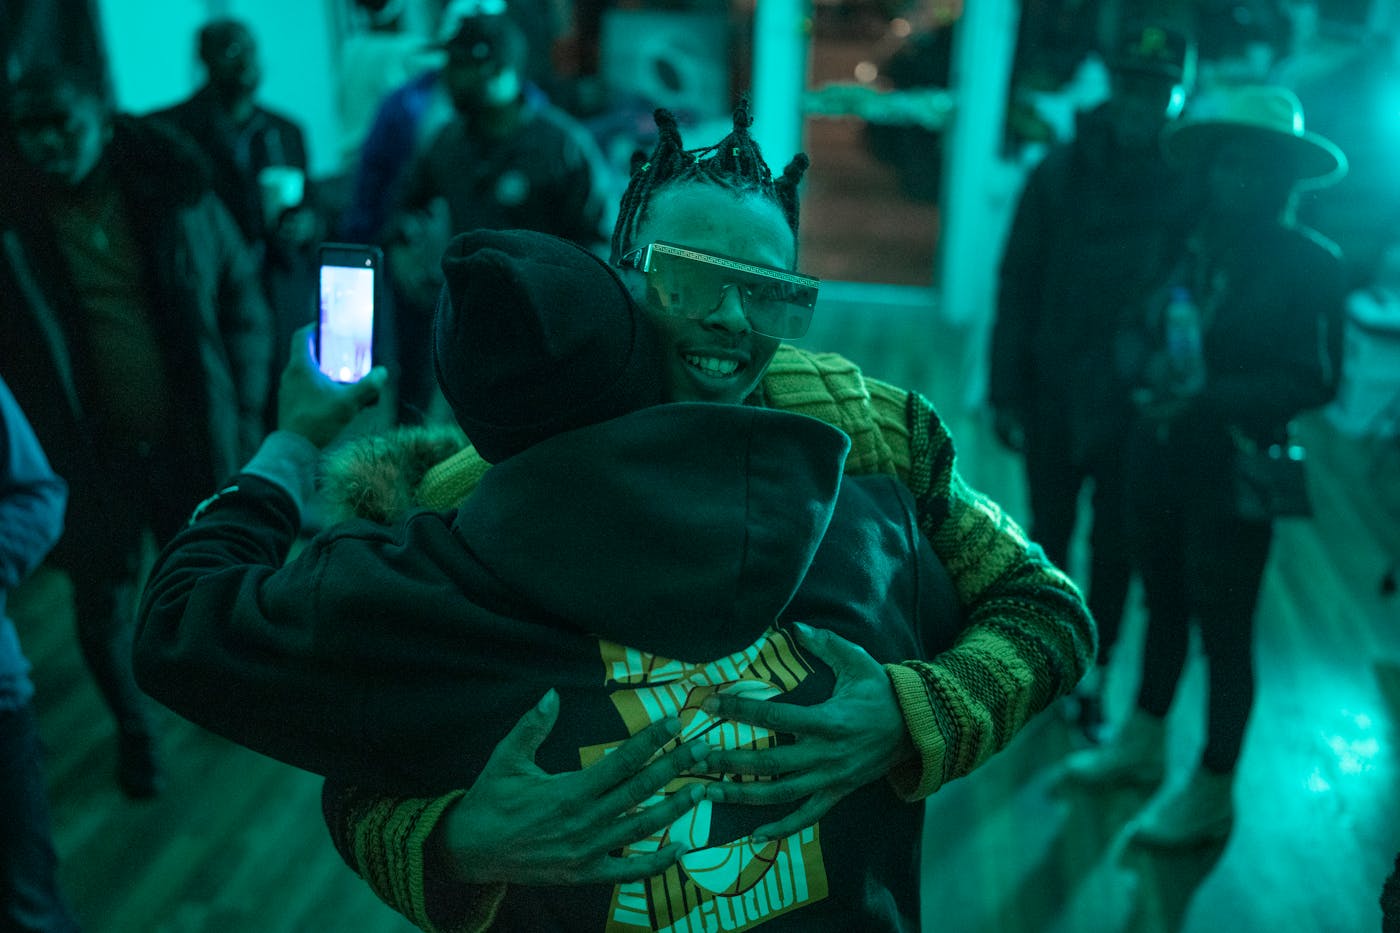 Musician Lewis McCaleb, known as Lewiee Blaze, celebrated his 25th birthday with friends. He considers himself "one of the lucky 50 percent" who survived extended probation without ending up in prison. He now mentors other teens in juvenile corrections.